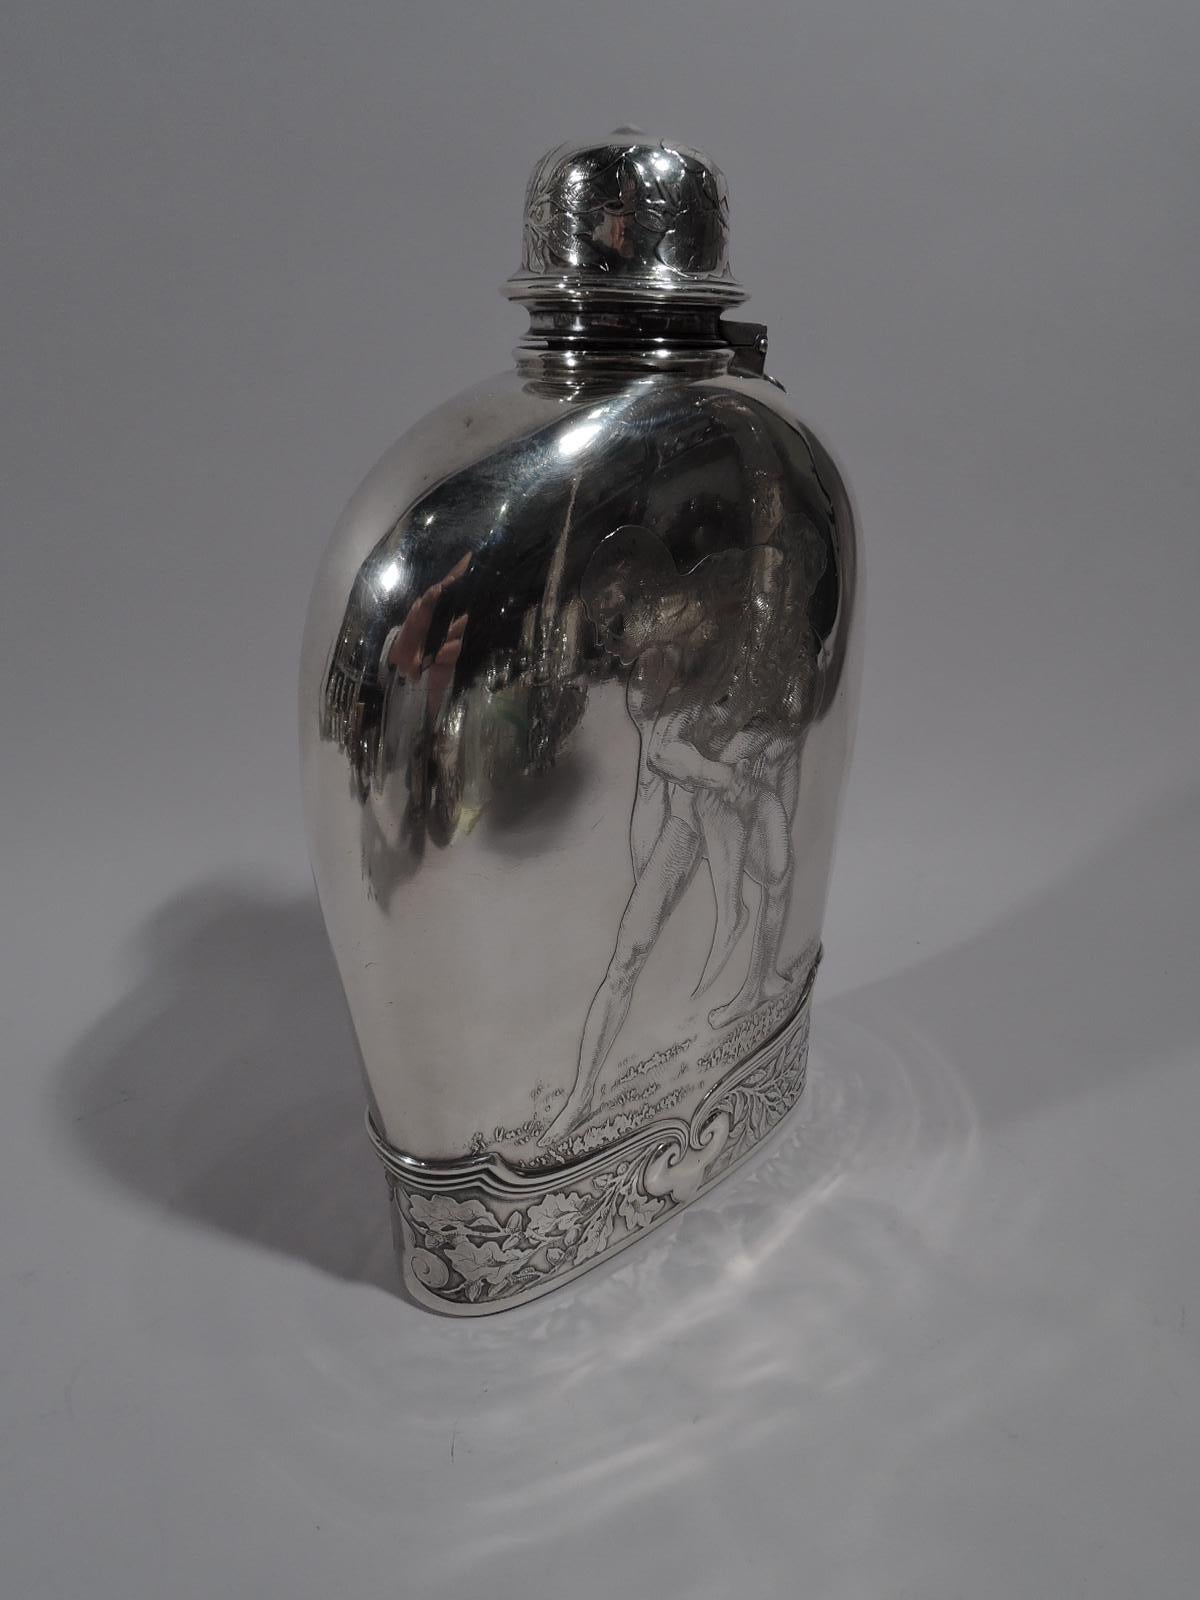 Large sterling silver flask made by Tiffany & Co. in New York. Arched top with hinged and cork-lined CAP. Acid-etched ornament. At bottom oak branches and fleurs de lys with reeded curvilinear border.

On front a pair of nude wrestlers heave and